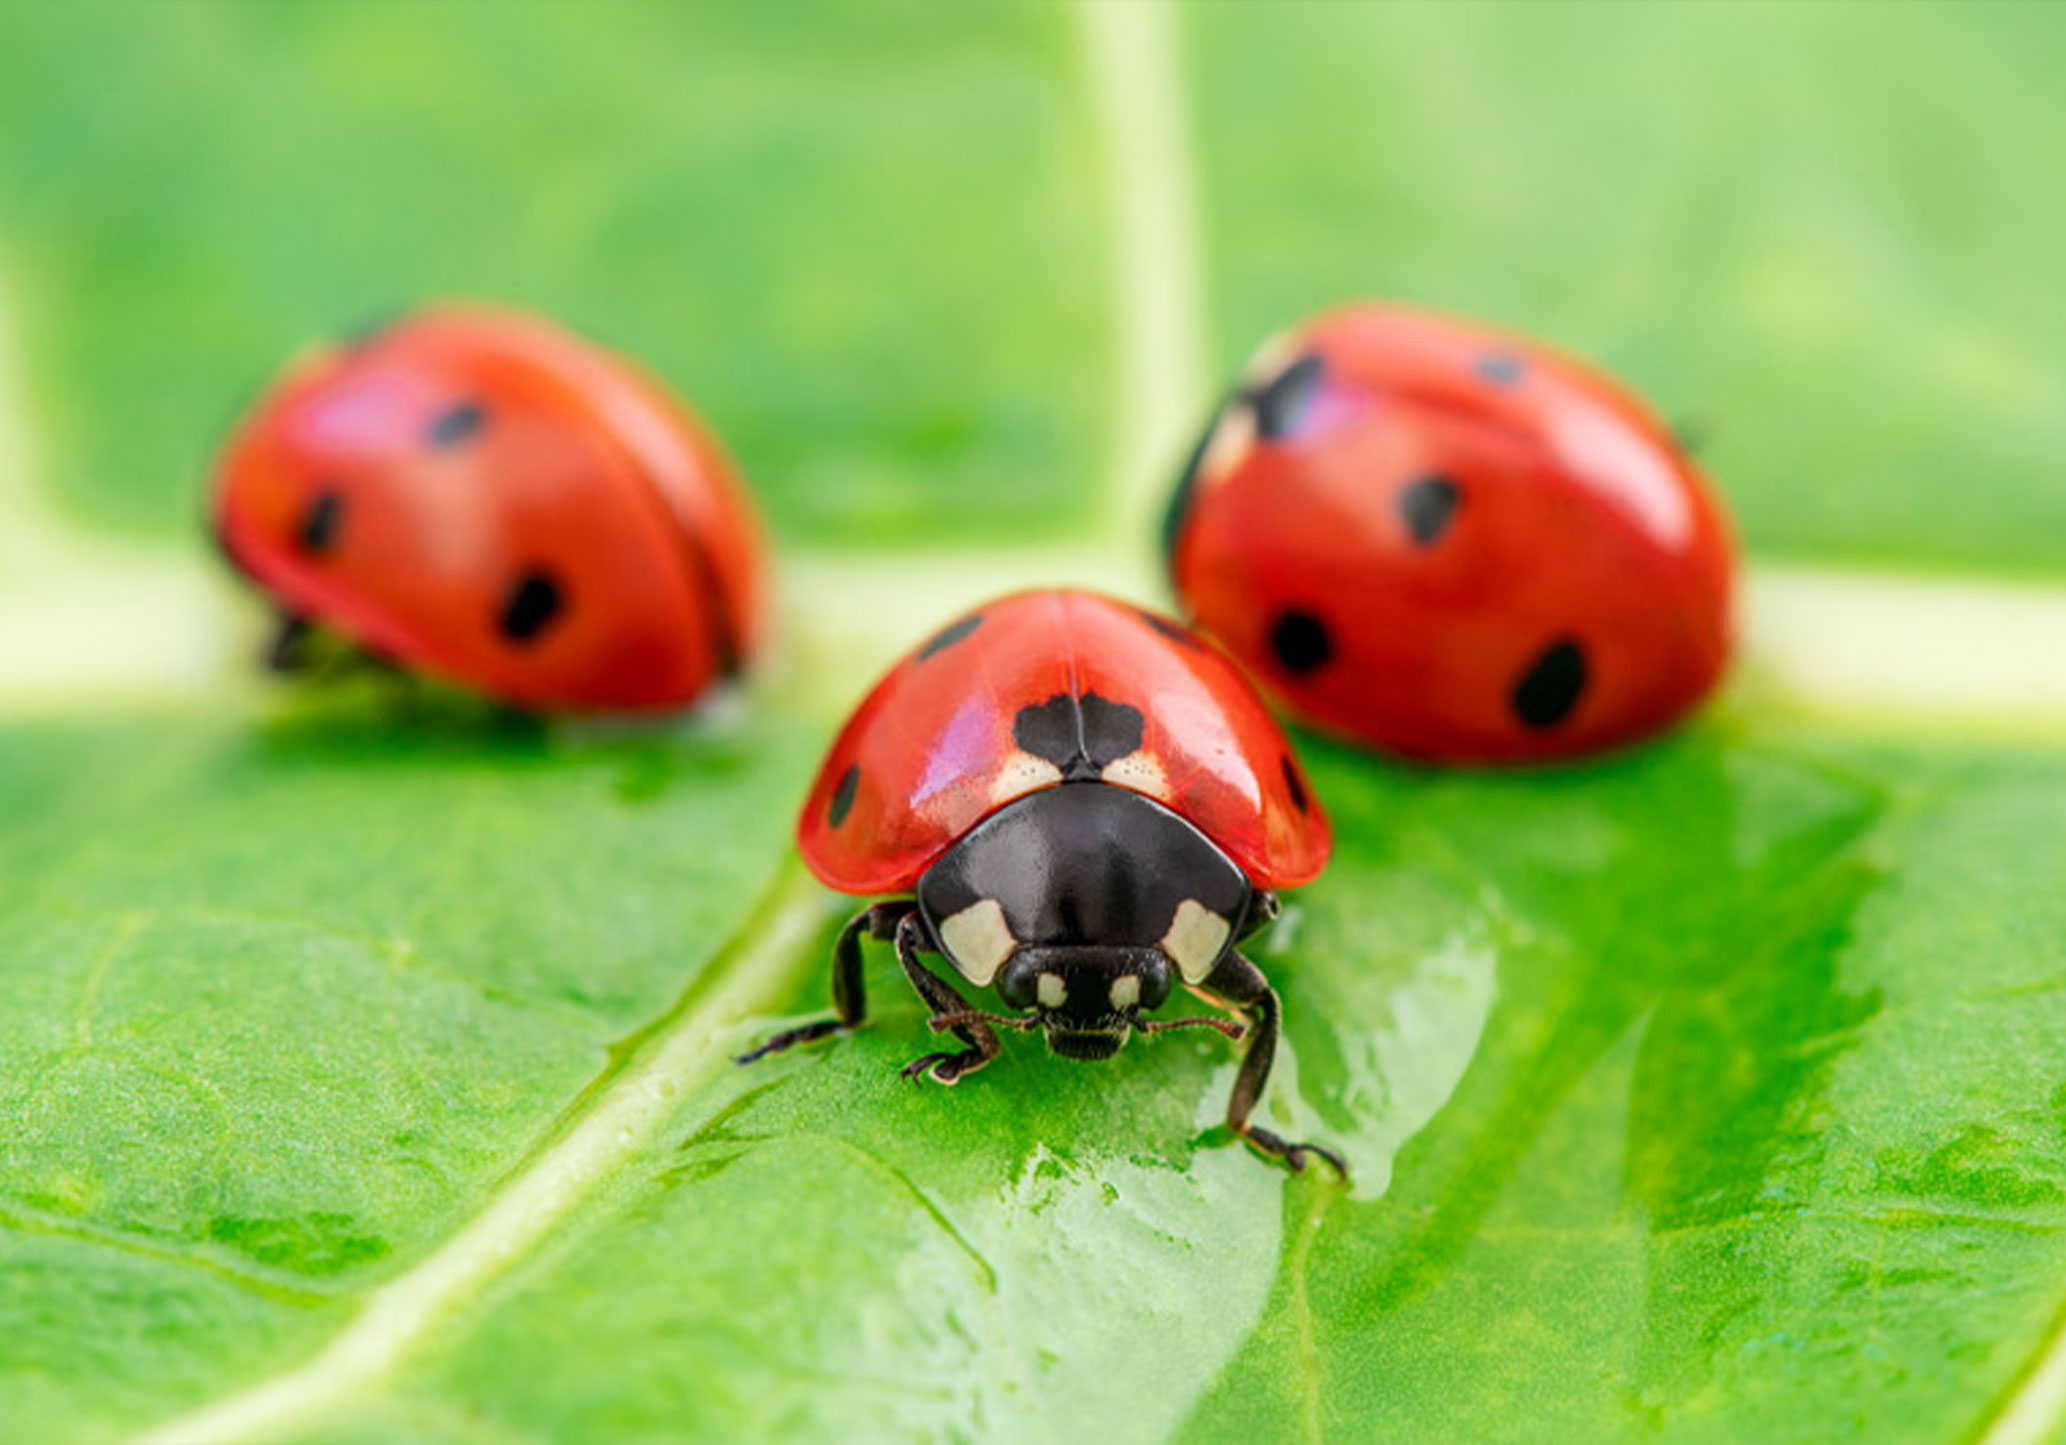 Lady Bug control and removal